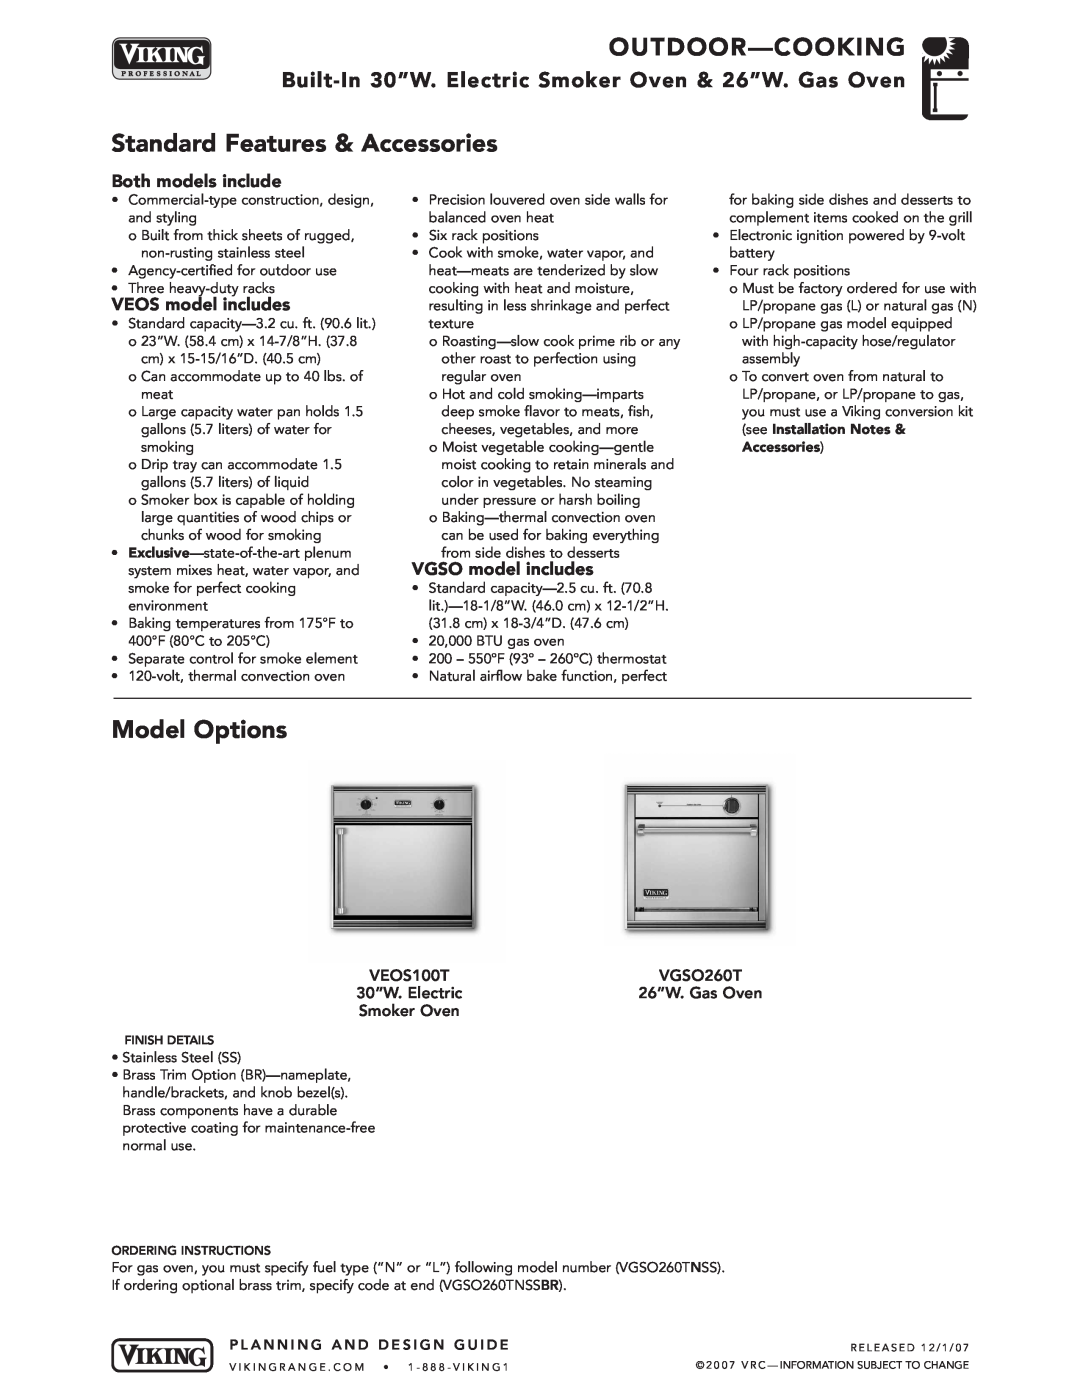 Viking VGSO260T manual Outdoor-Cooking, Standard Features & Accessories, Model Options, Both models include, VEOS100T 